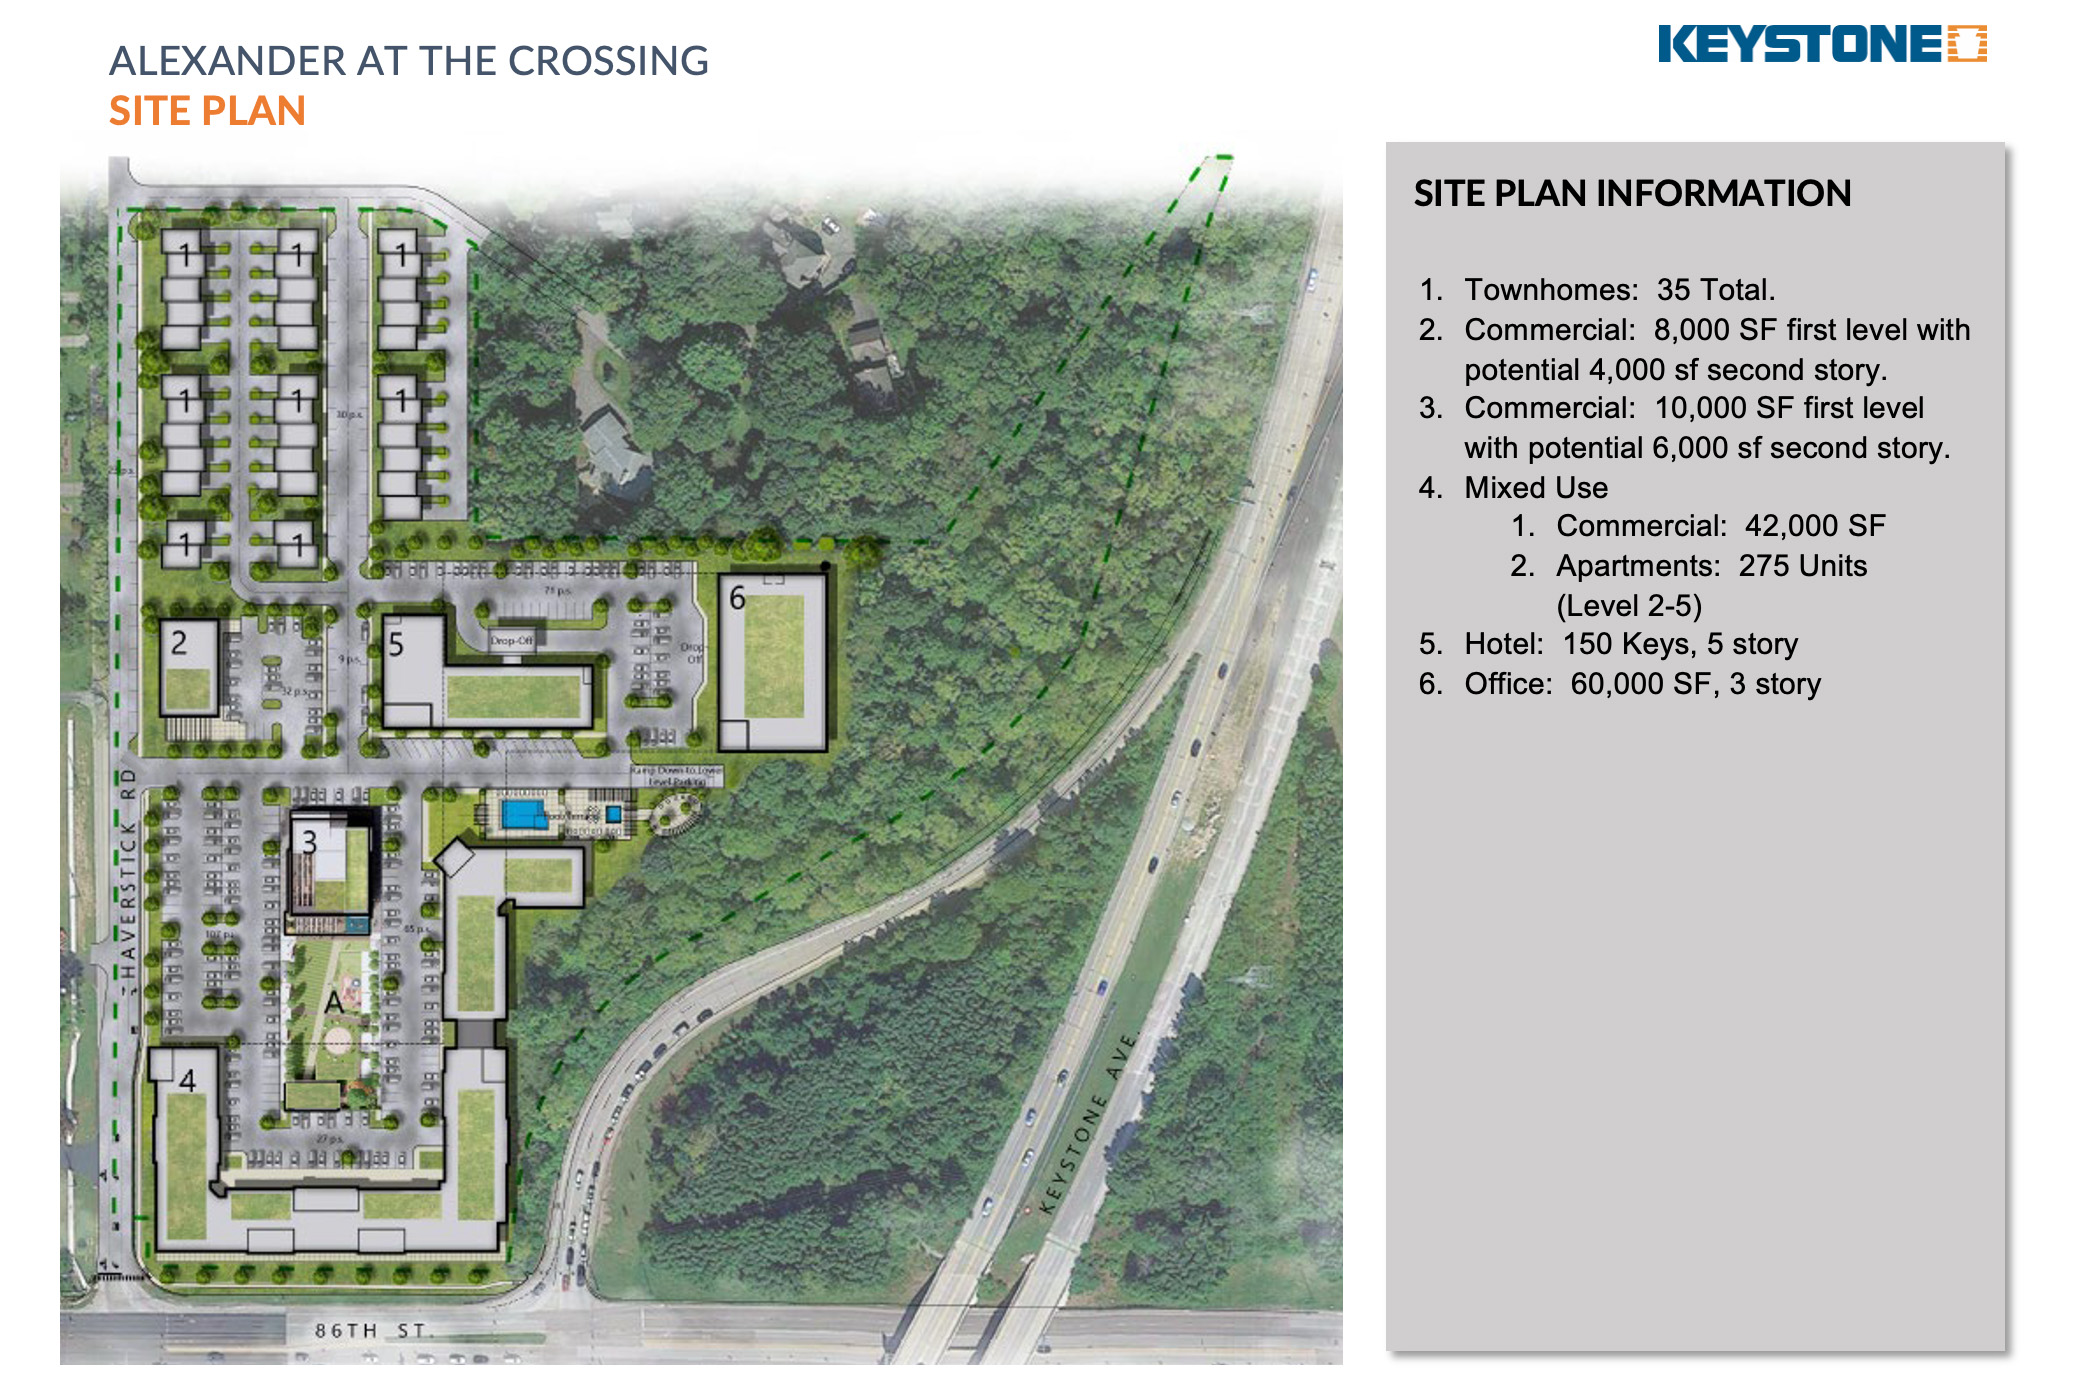 Keystone seeking zoning OK for redesigned Alexander project across from  Ironworks on 86th Street – Indianapolis Business Journal